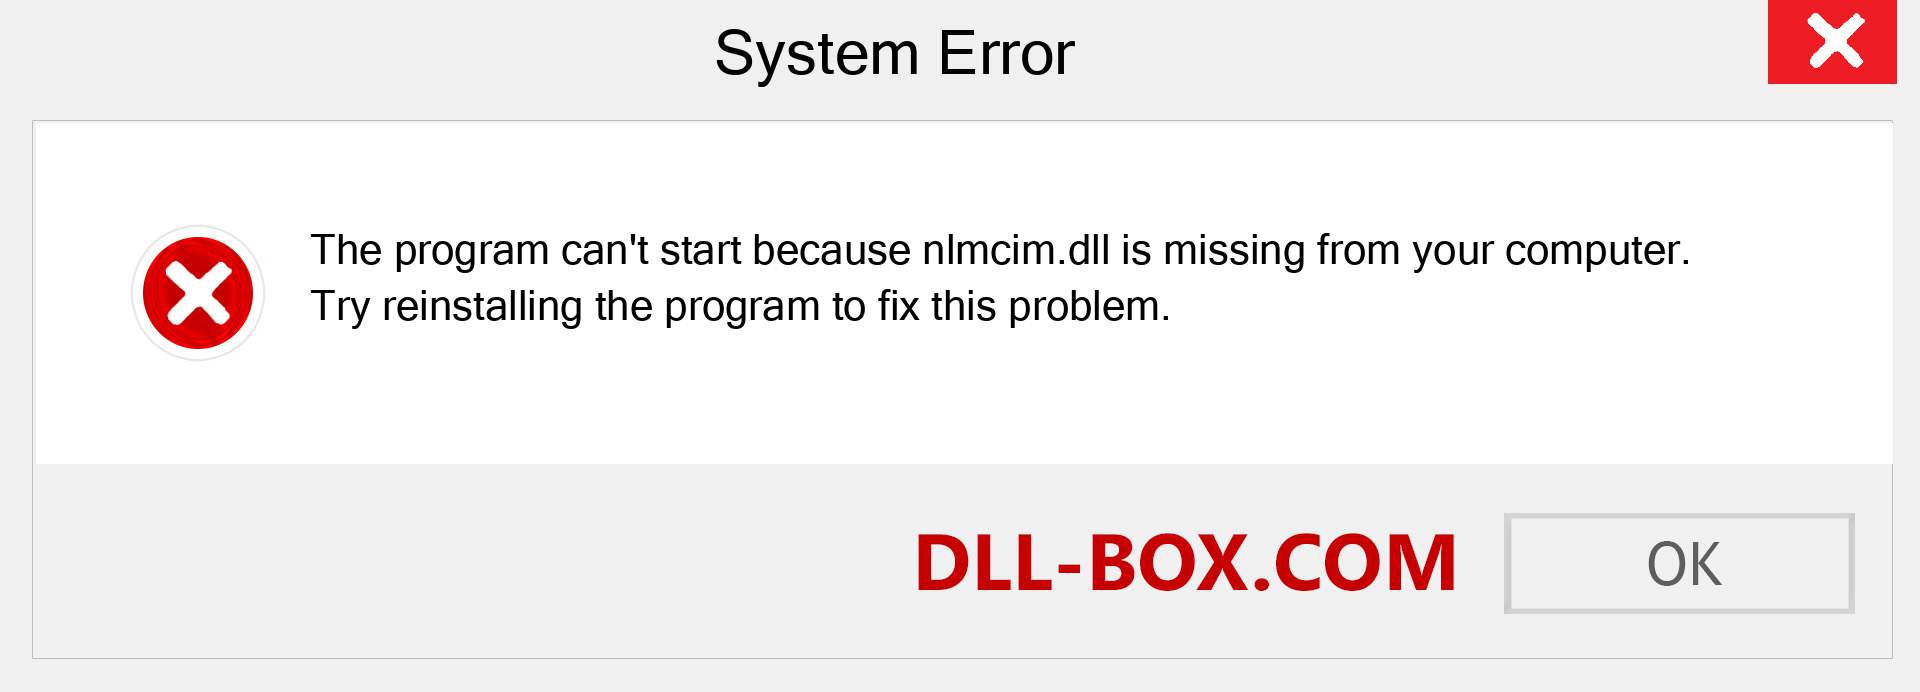  nlmcim.dll file is missing?. Download for Windows 7, 8, 10 - Fix  nlmcim dll Missing Error on Windows, photos, images